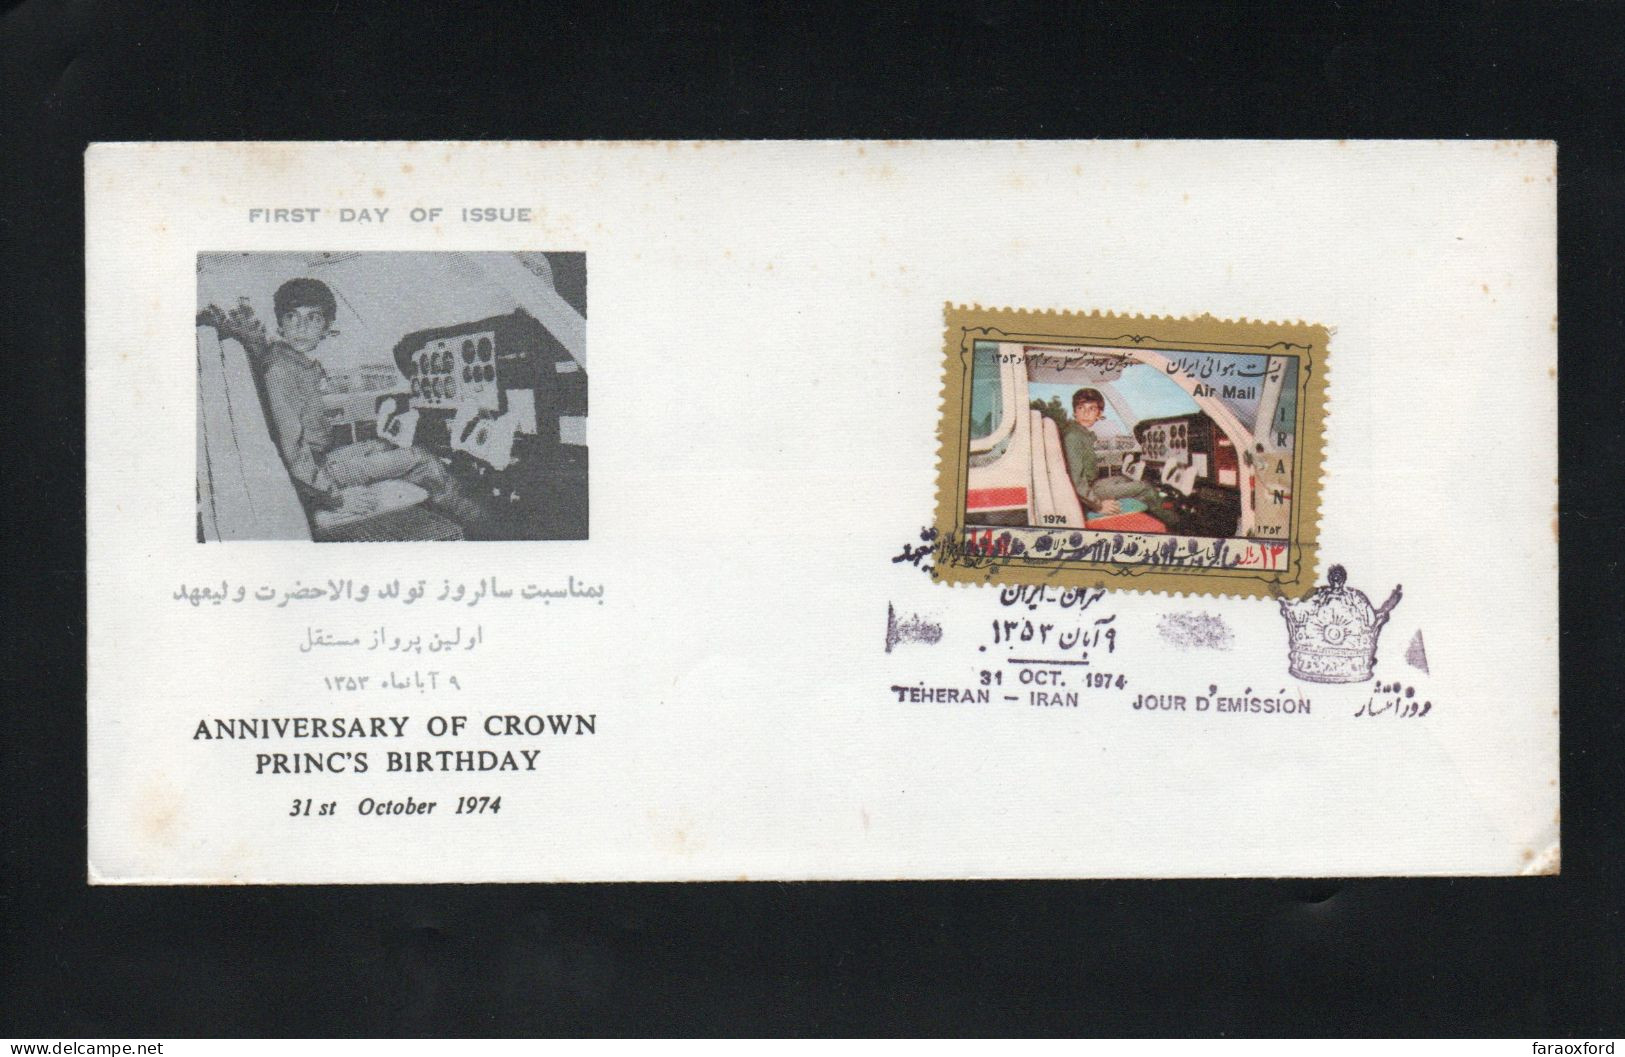 IRAN - ايران - PERSIA - 1974 - CROWN PRINCE'S BIRTHDAY - FIRST DAY COVER - SPECIAL TEHERAN POSTMARK - Irán